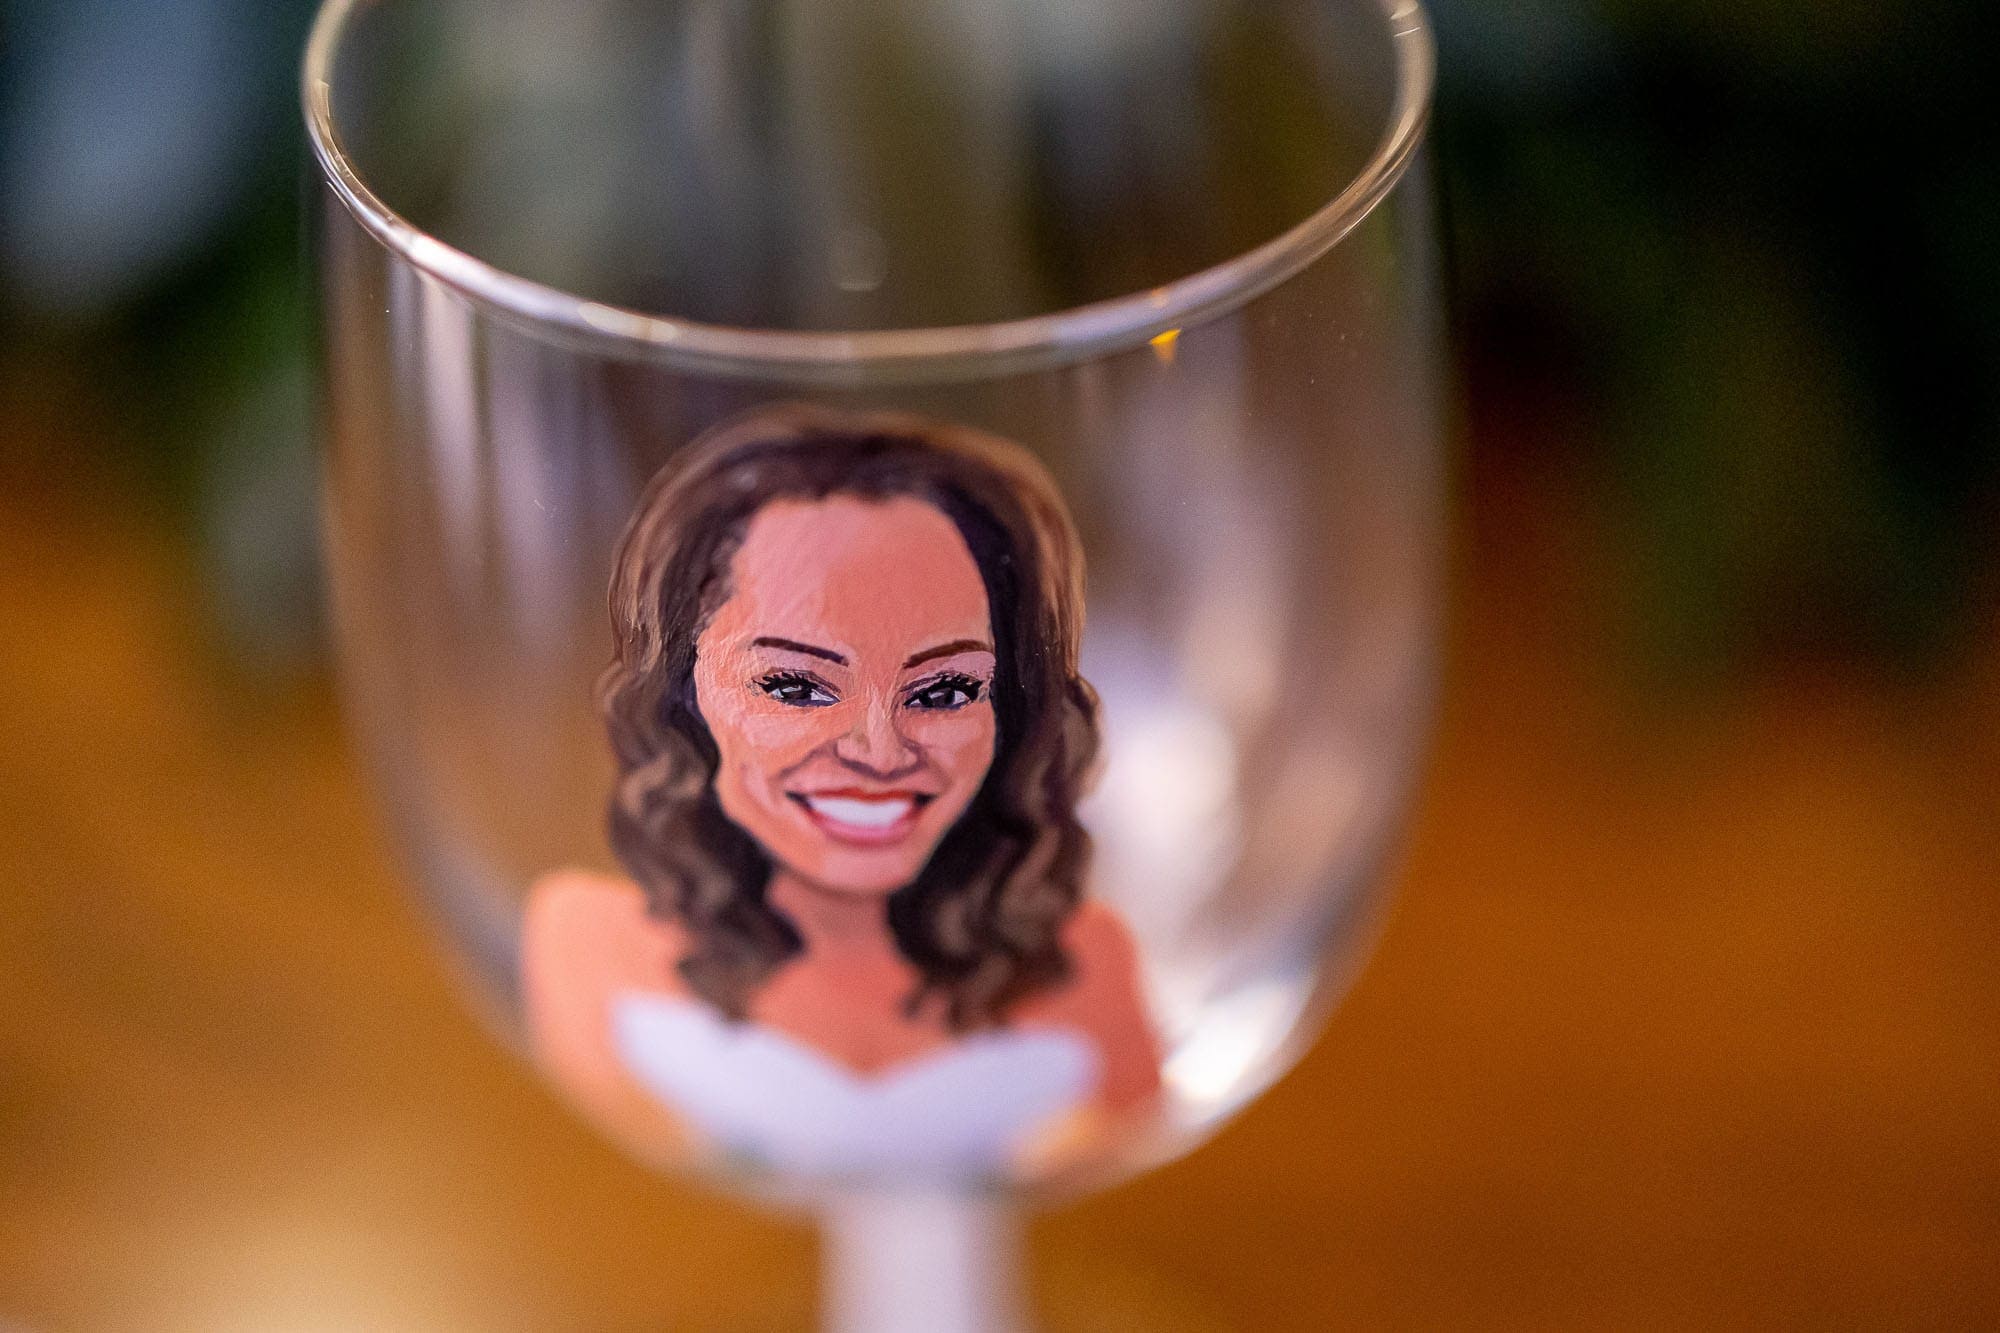 Bride's likeness painted on a glass